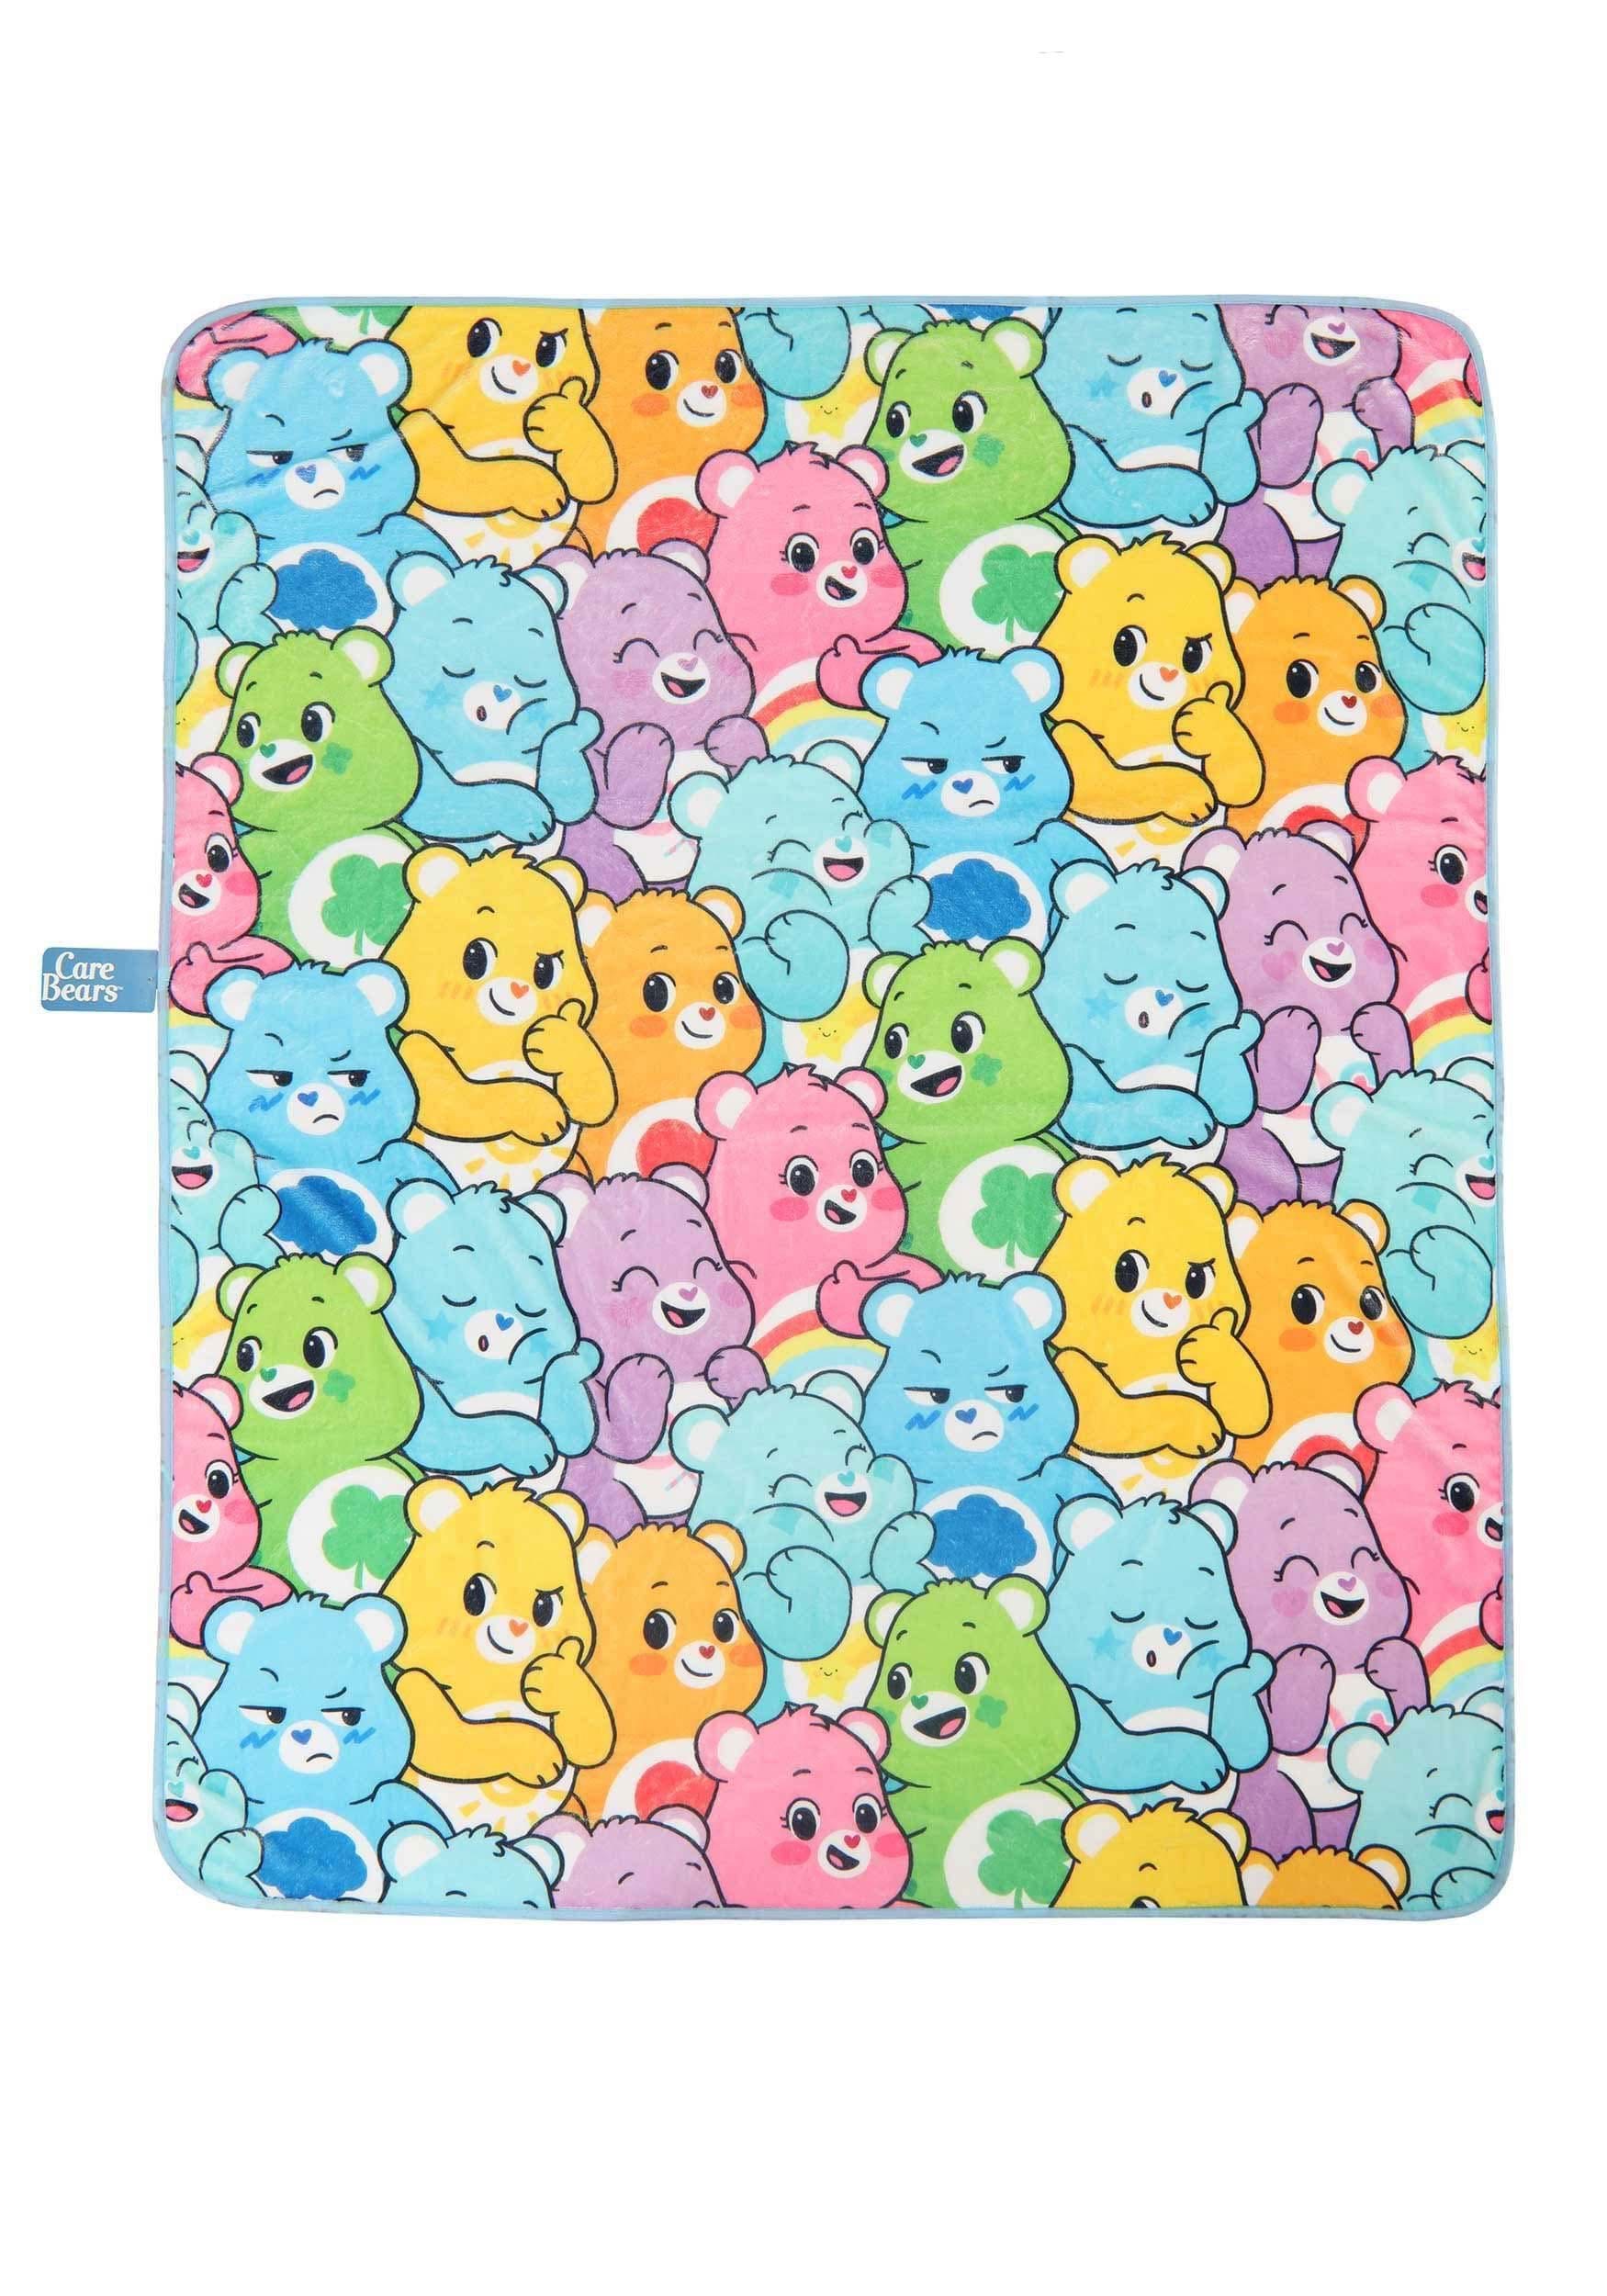 Care Bears Characters Comfy Throw , Care Bears Bedding & Living